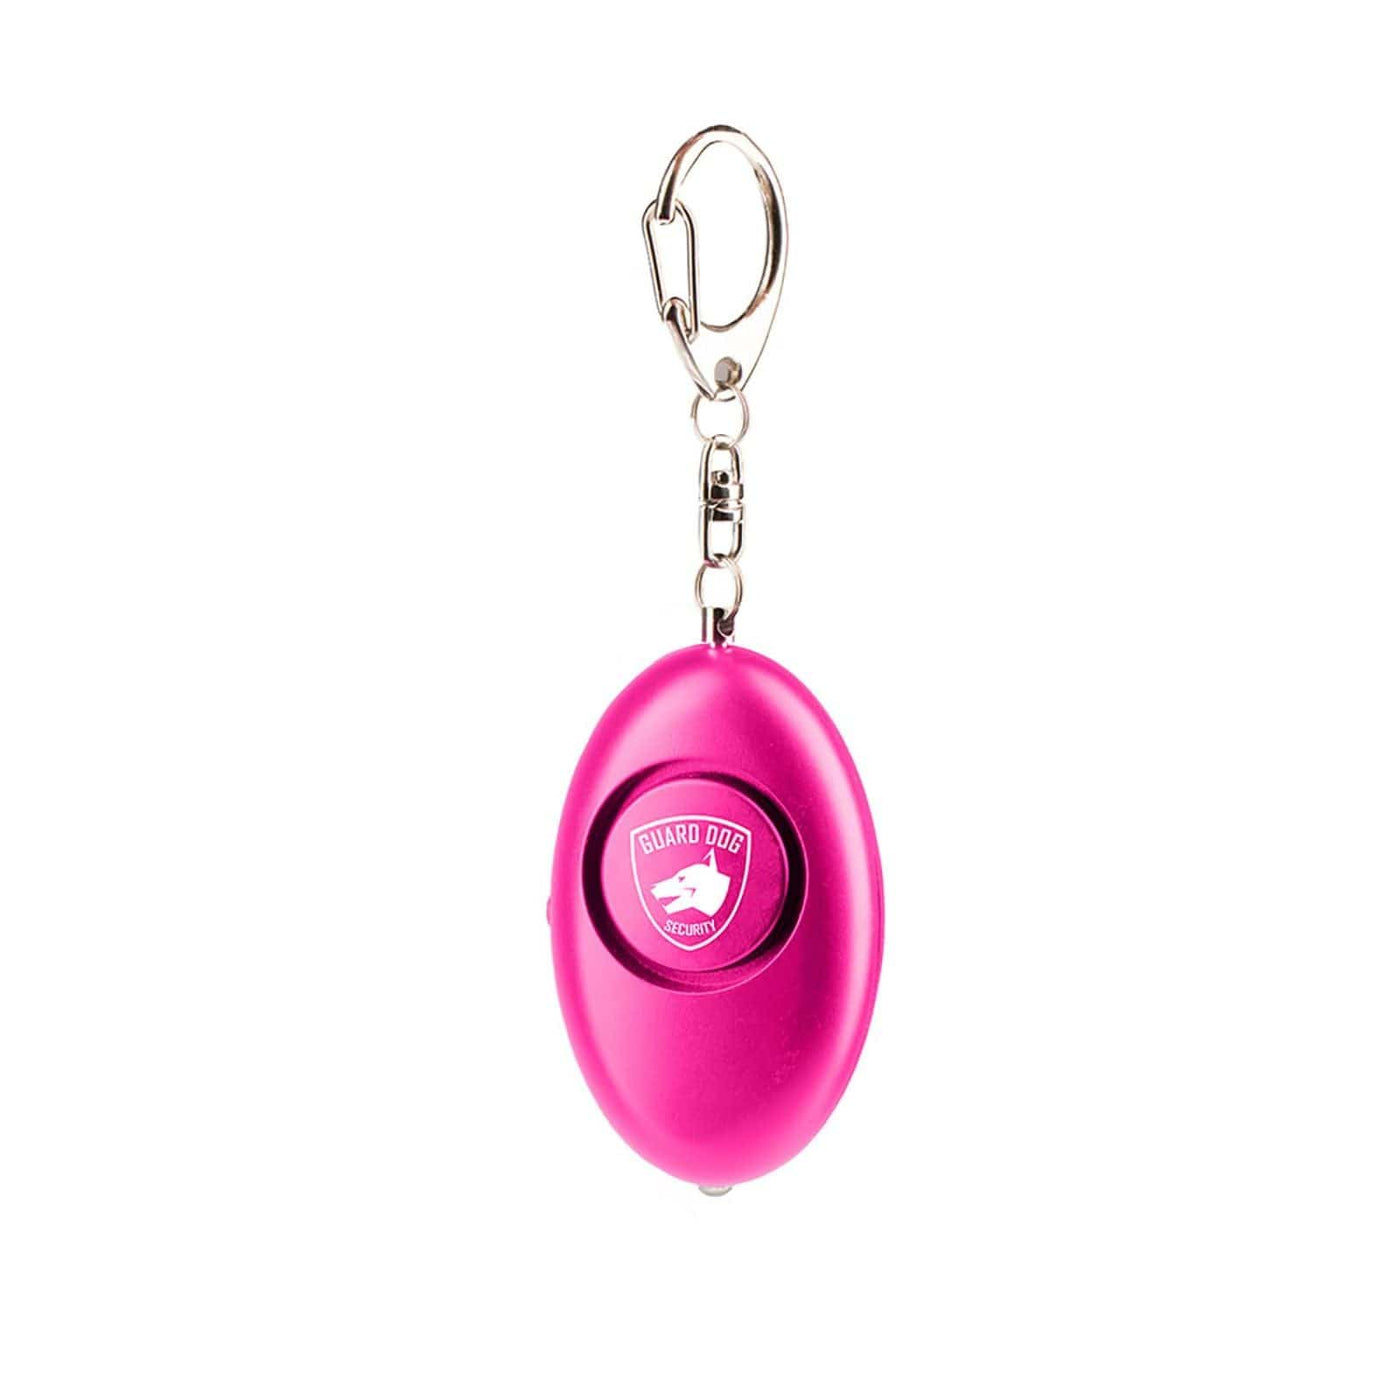 Guard Dog Security Guard Dog 120dB Keychain Alarm w LED light Pink Public Safety And Le